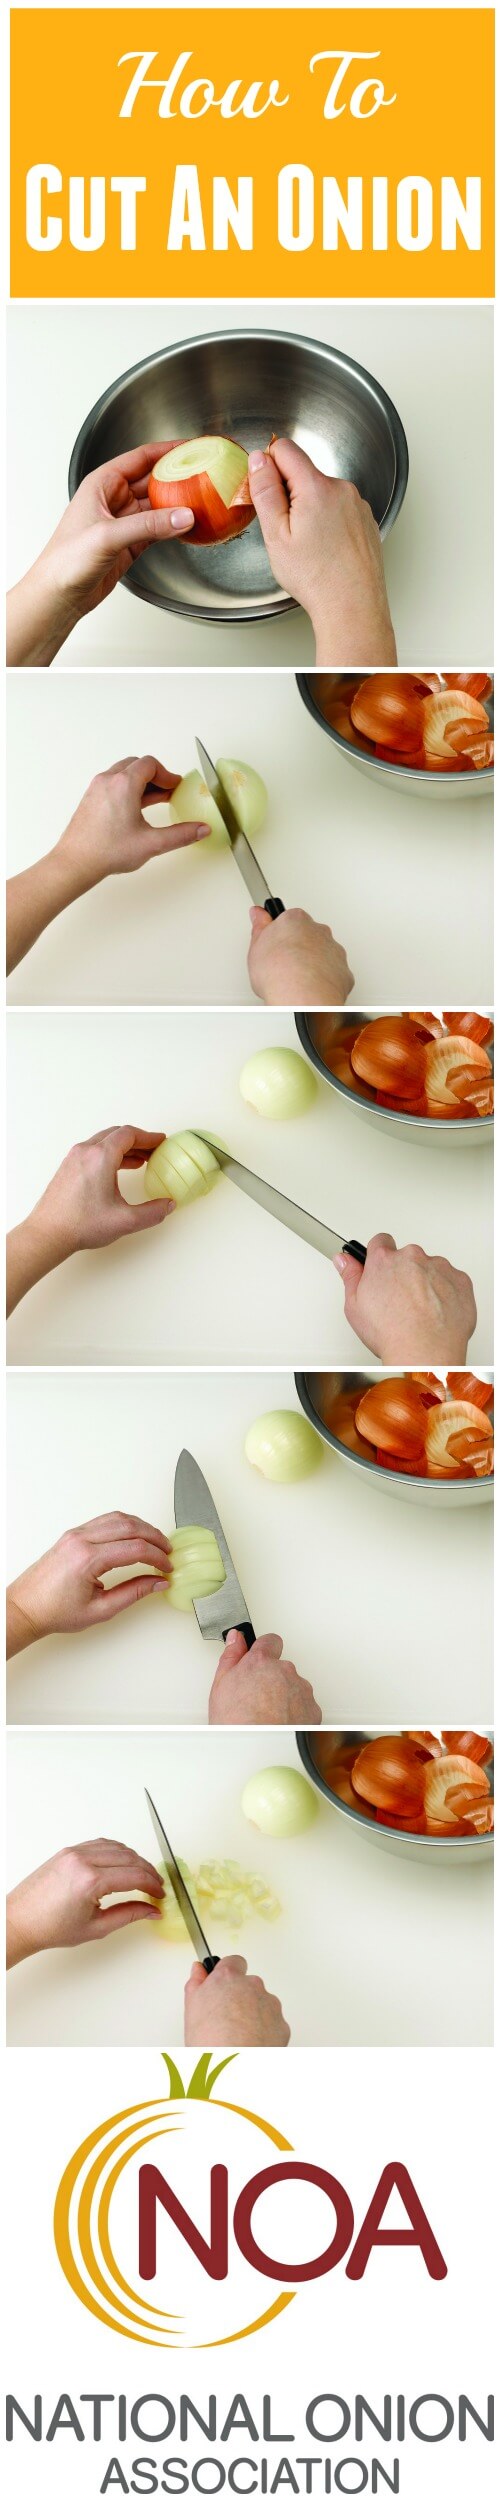 https://www.onions-usa.org/wp-content/uploads/2015/03/how-to-cut-an-onion.jpg